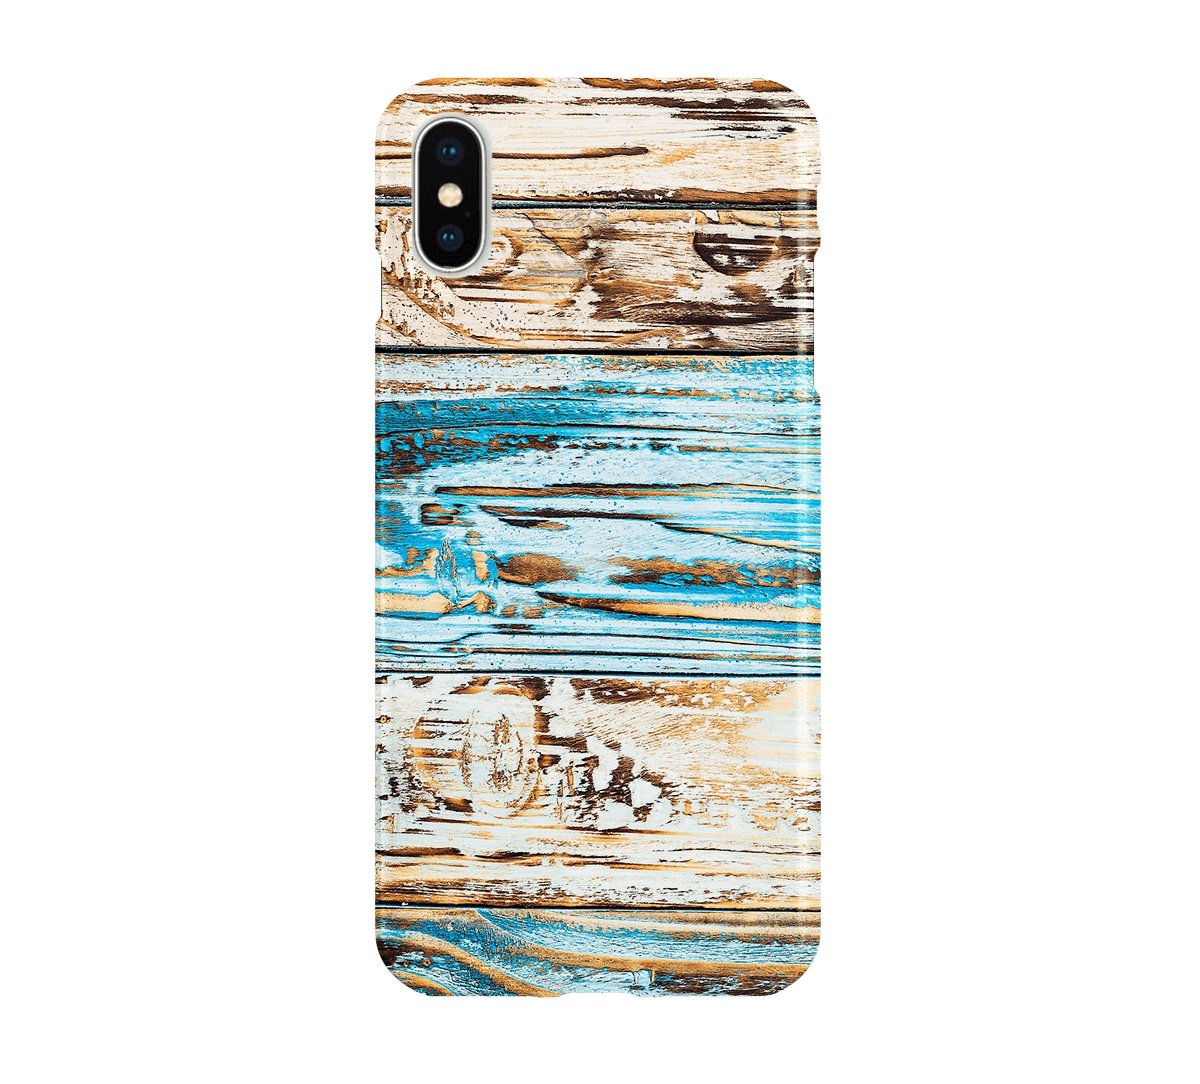 Scrapped BlueWash - iPhone phone case designs by CaseSwagger